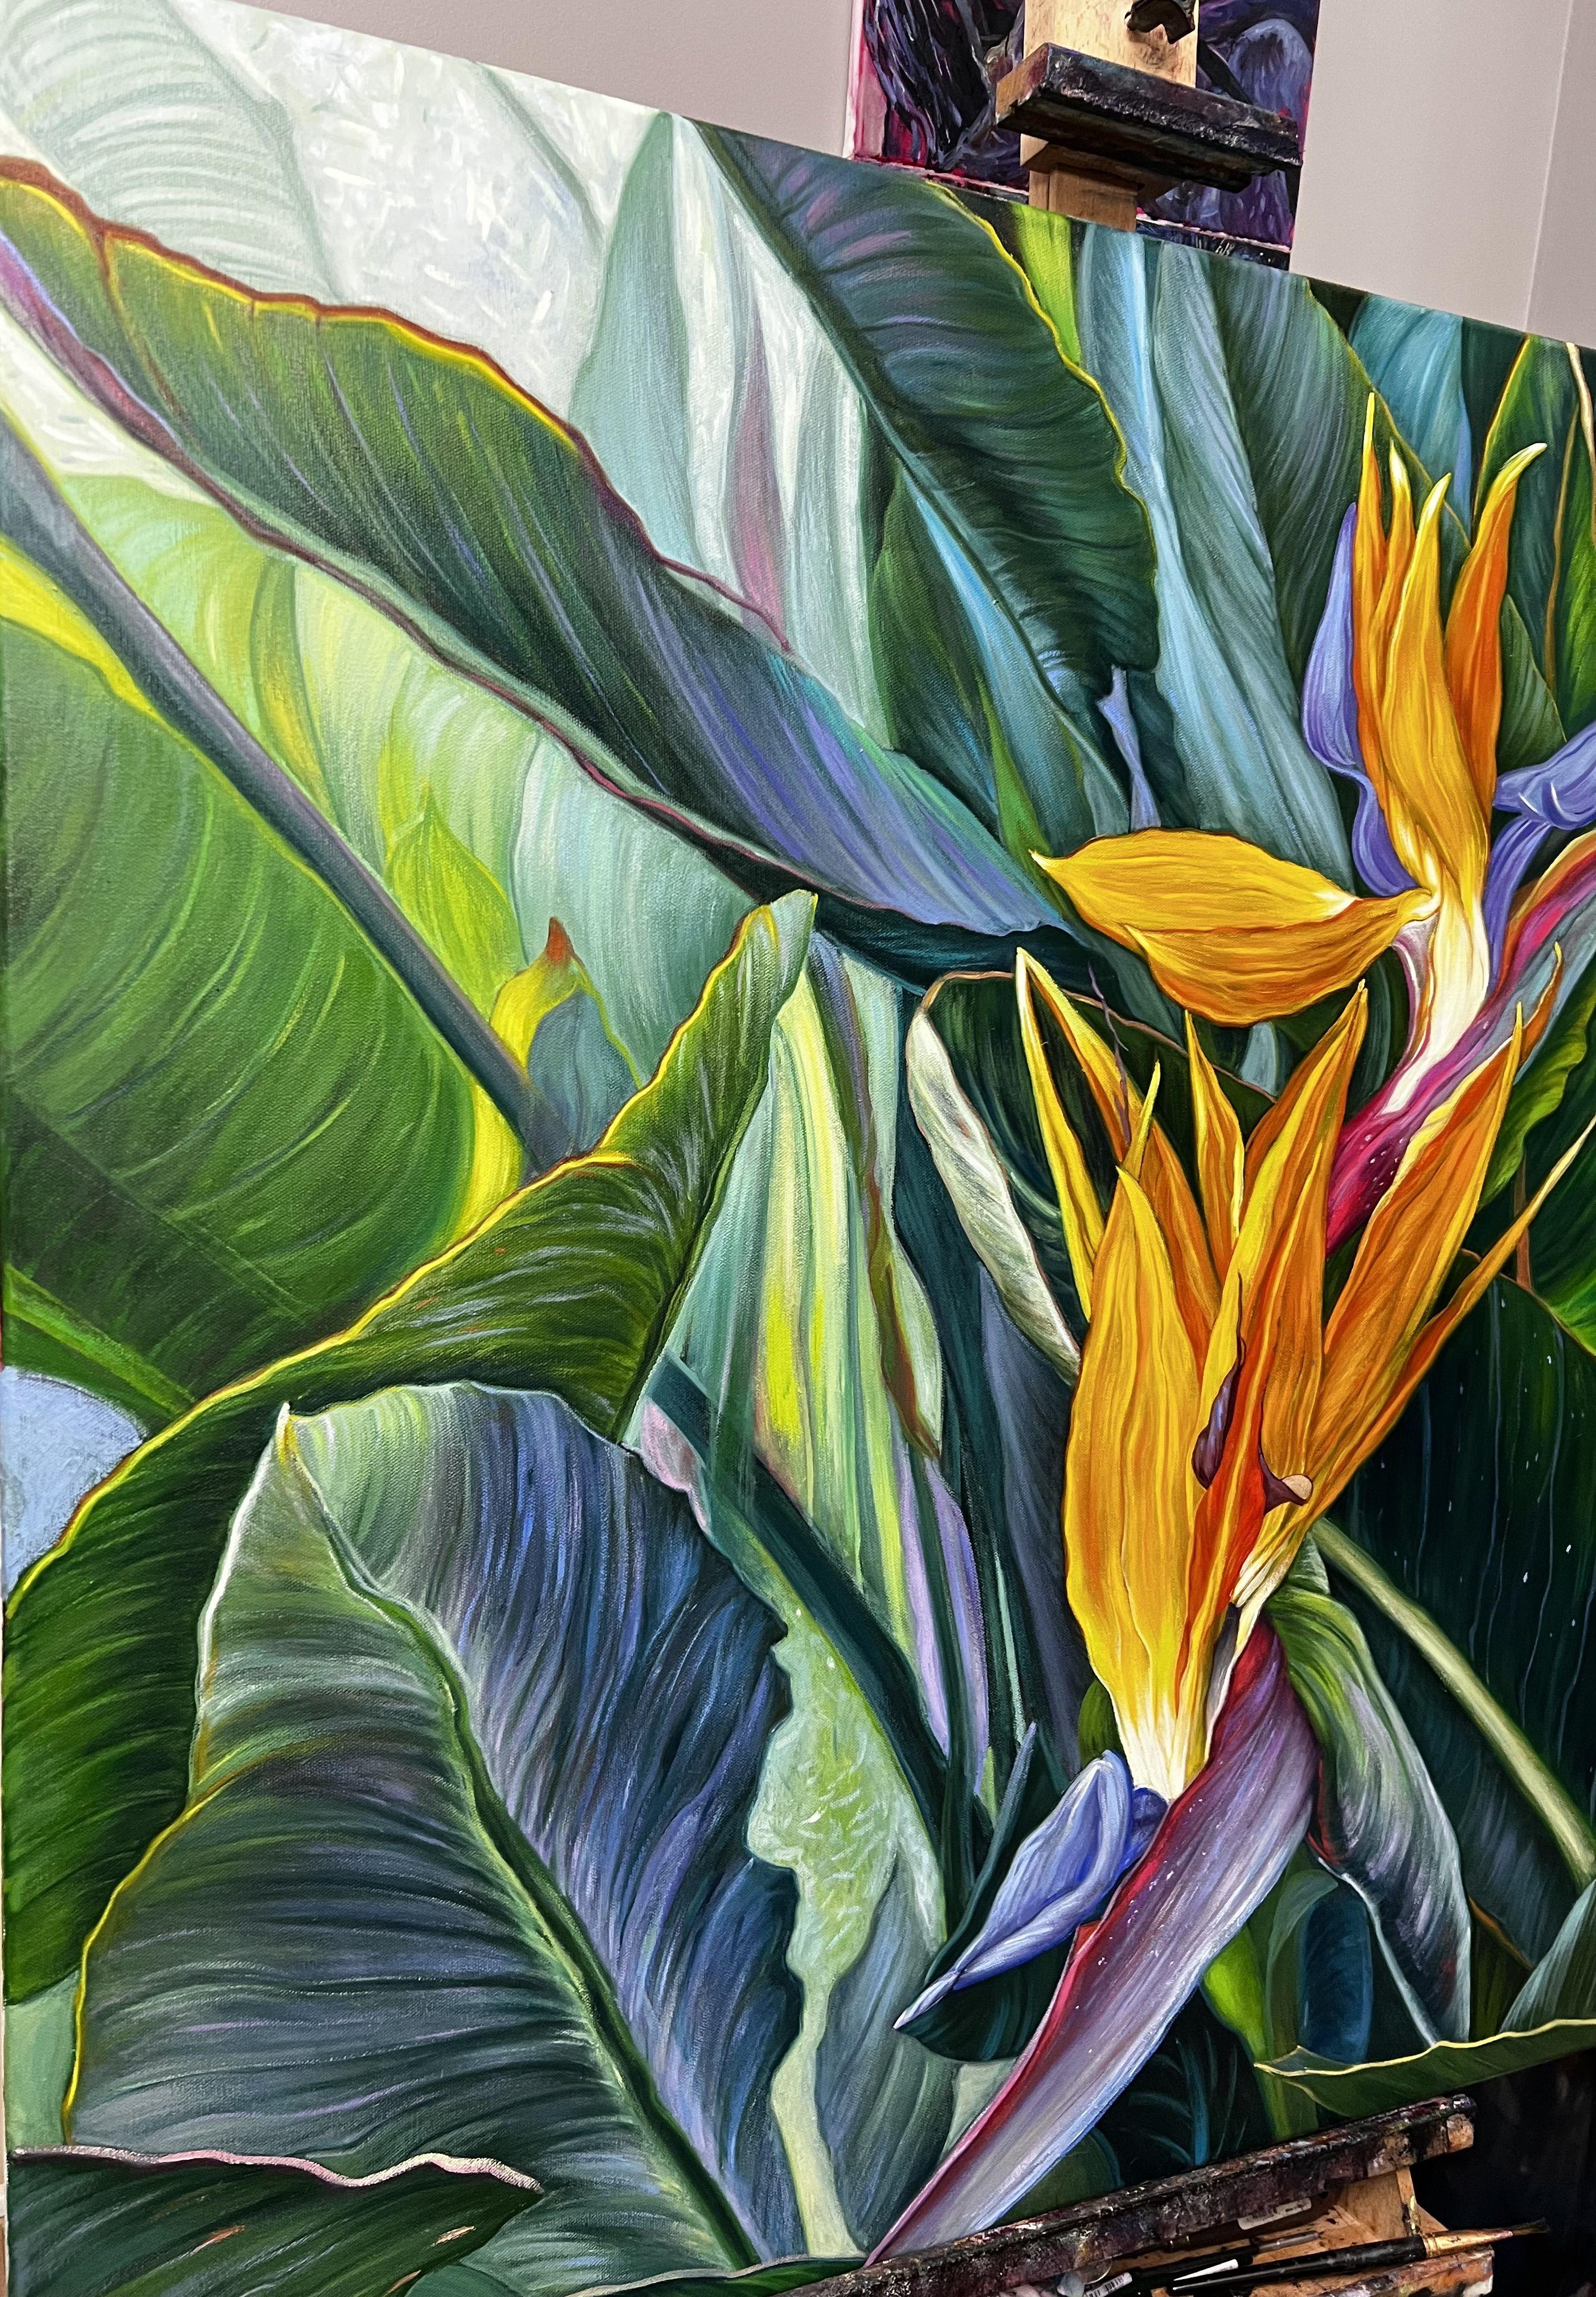 Flower arrangement of tropical plants. Made on canvas gallery stretch, professional paints. Before sending, the painting will be covered with a protective varnish :: Painting :: Photorealism :: This piece comes with an official certificate of